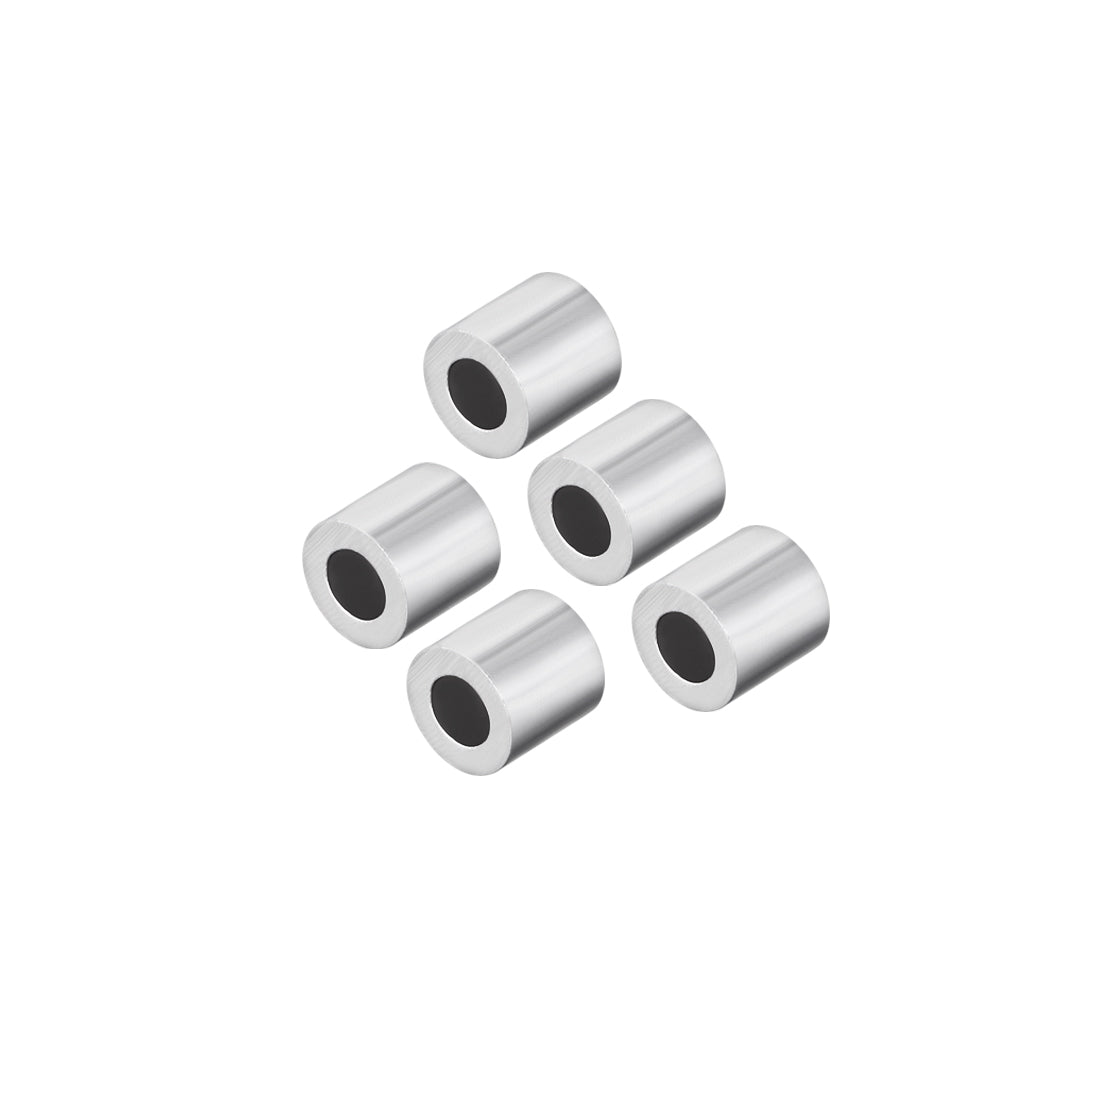 uxcell Uxcell M3 Aluminum Sleeve Crimp 3mm(1/8 In) Steel Wire Rope Button Stop 5 Pcs